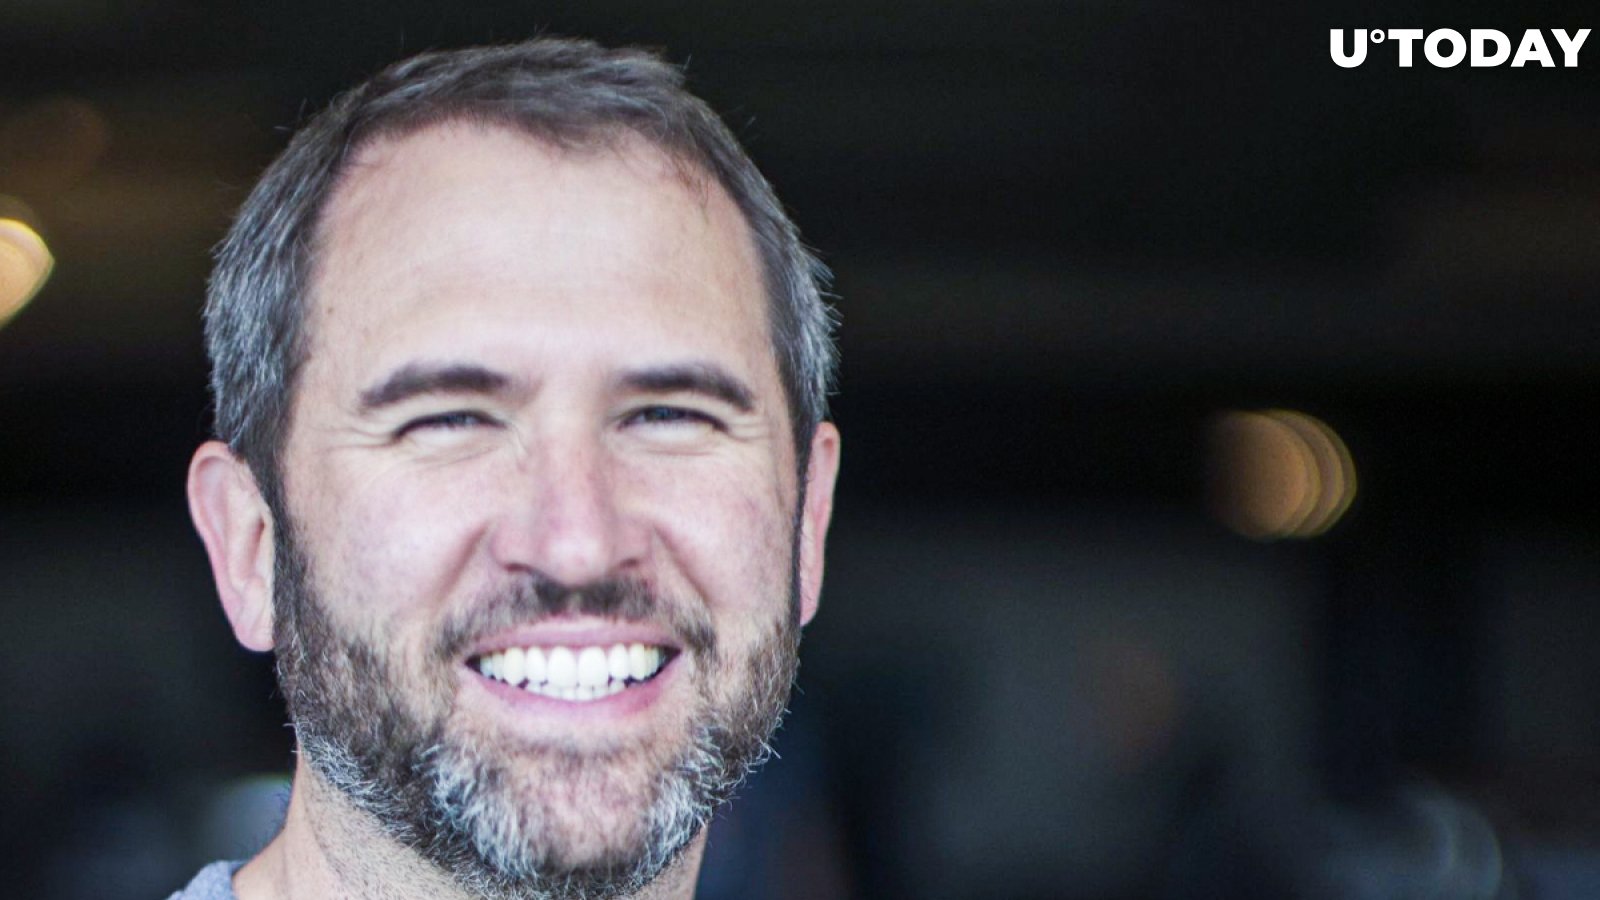 If Ripple Goes Away, XRP Will Keep Trading: CEO Brad Garlinghouse